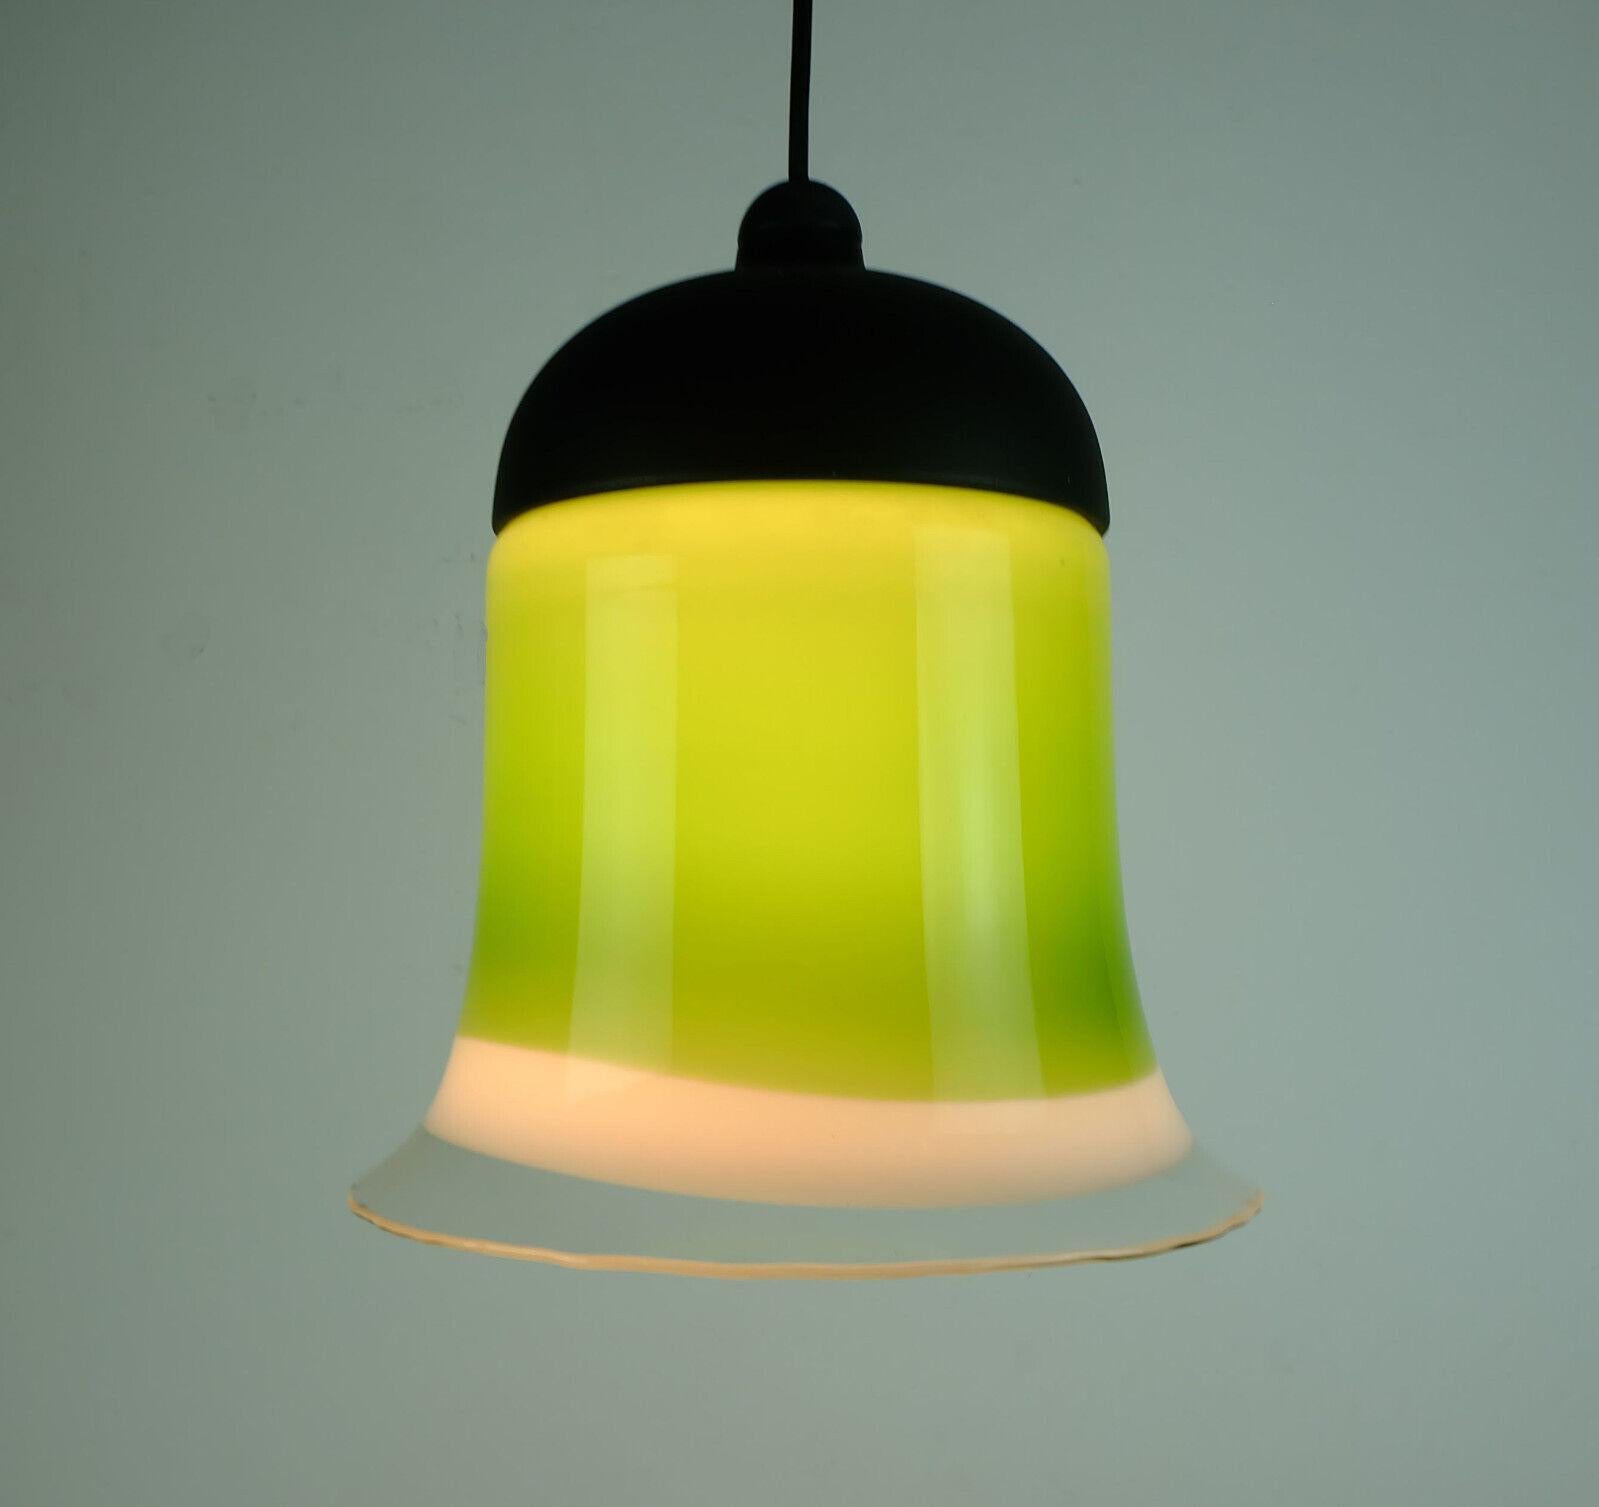 Very beautiful 1970s pendant lamp manufactured by Peill & Putzler. Model number AH 191. The shade is made of multicolored glass: green, white and clear. Black lacquered metal on top, black electric wire. Holds 1 E 27 bulb.

Measures: Overall